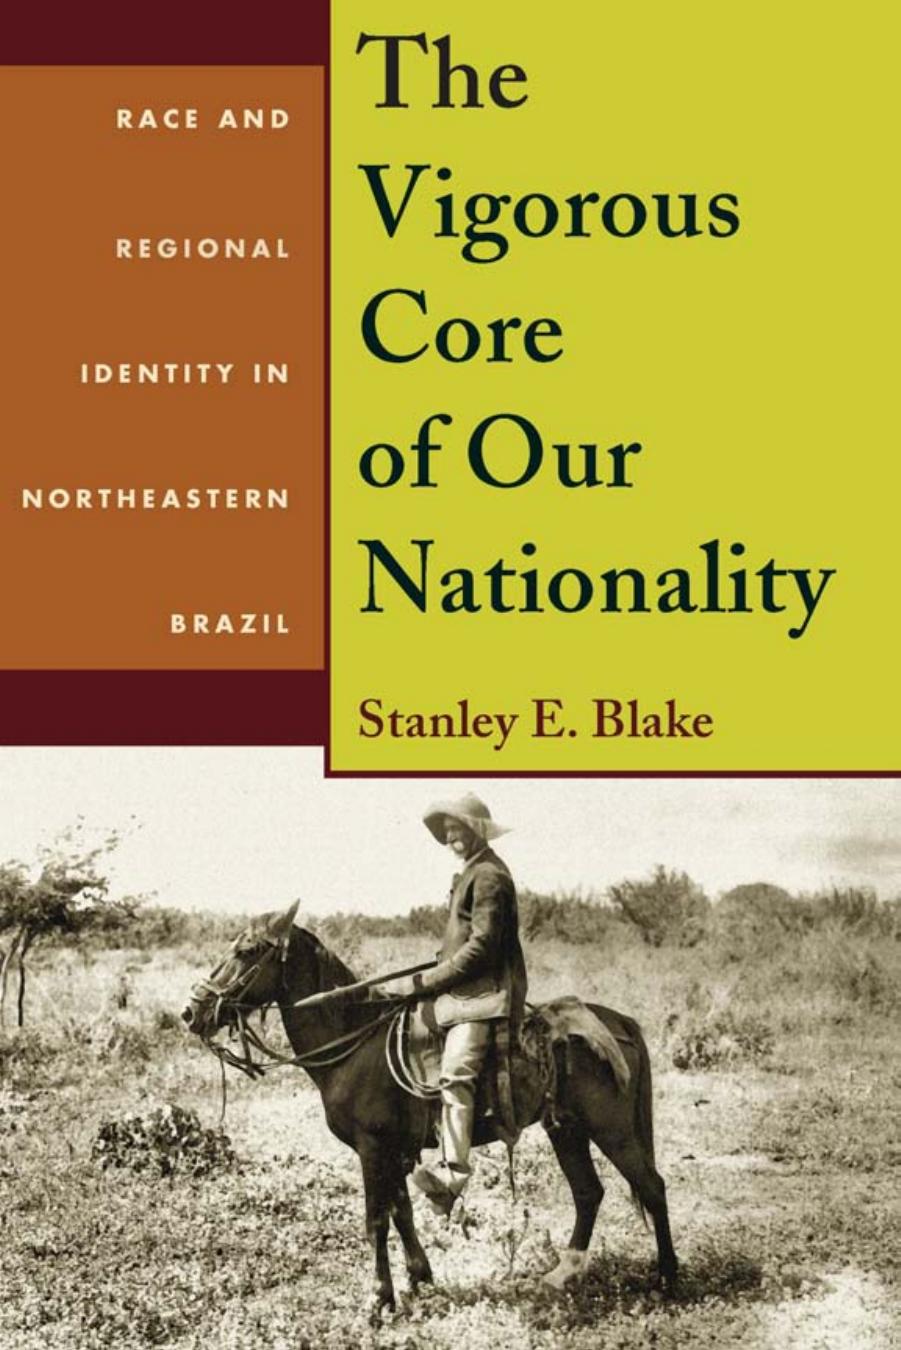 The Vigorous Core of Our Nationality : Race and Regional Identity in Northeastern Brazil by Stanley E. Blake